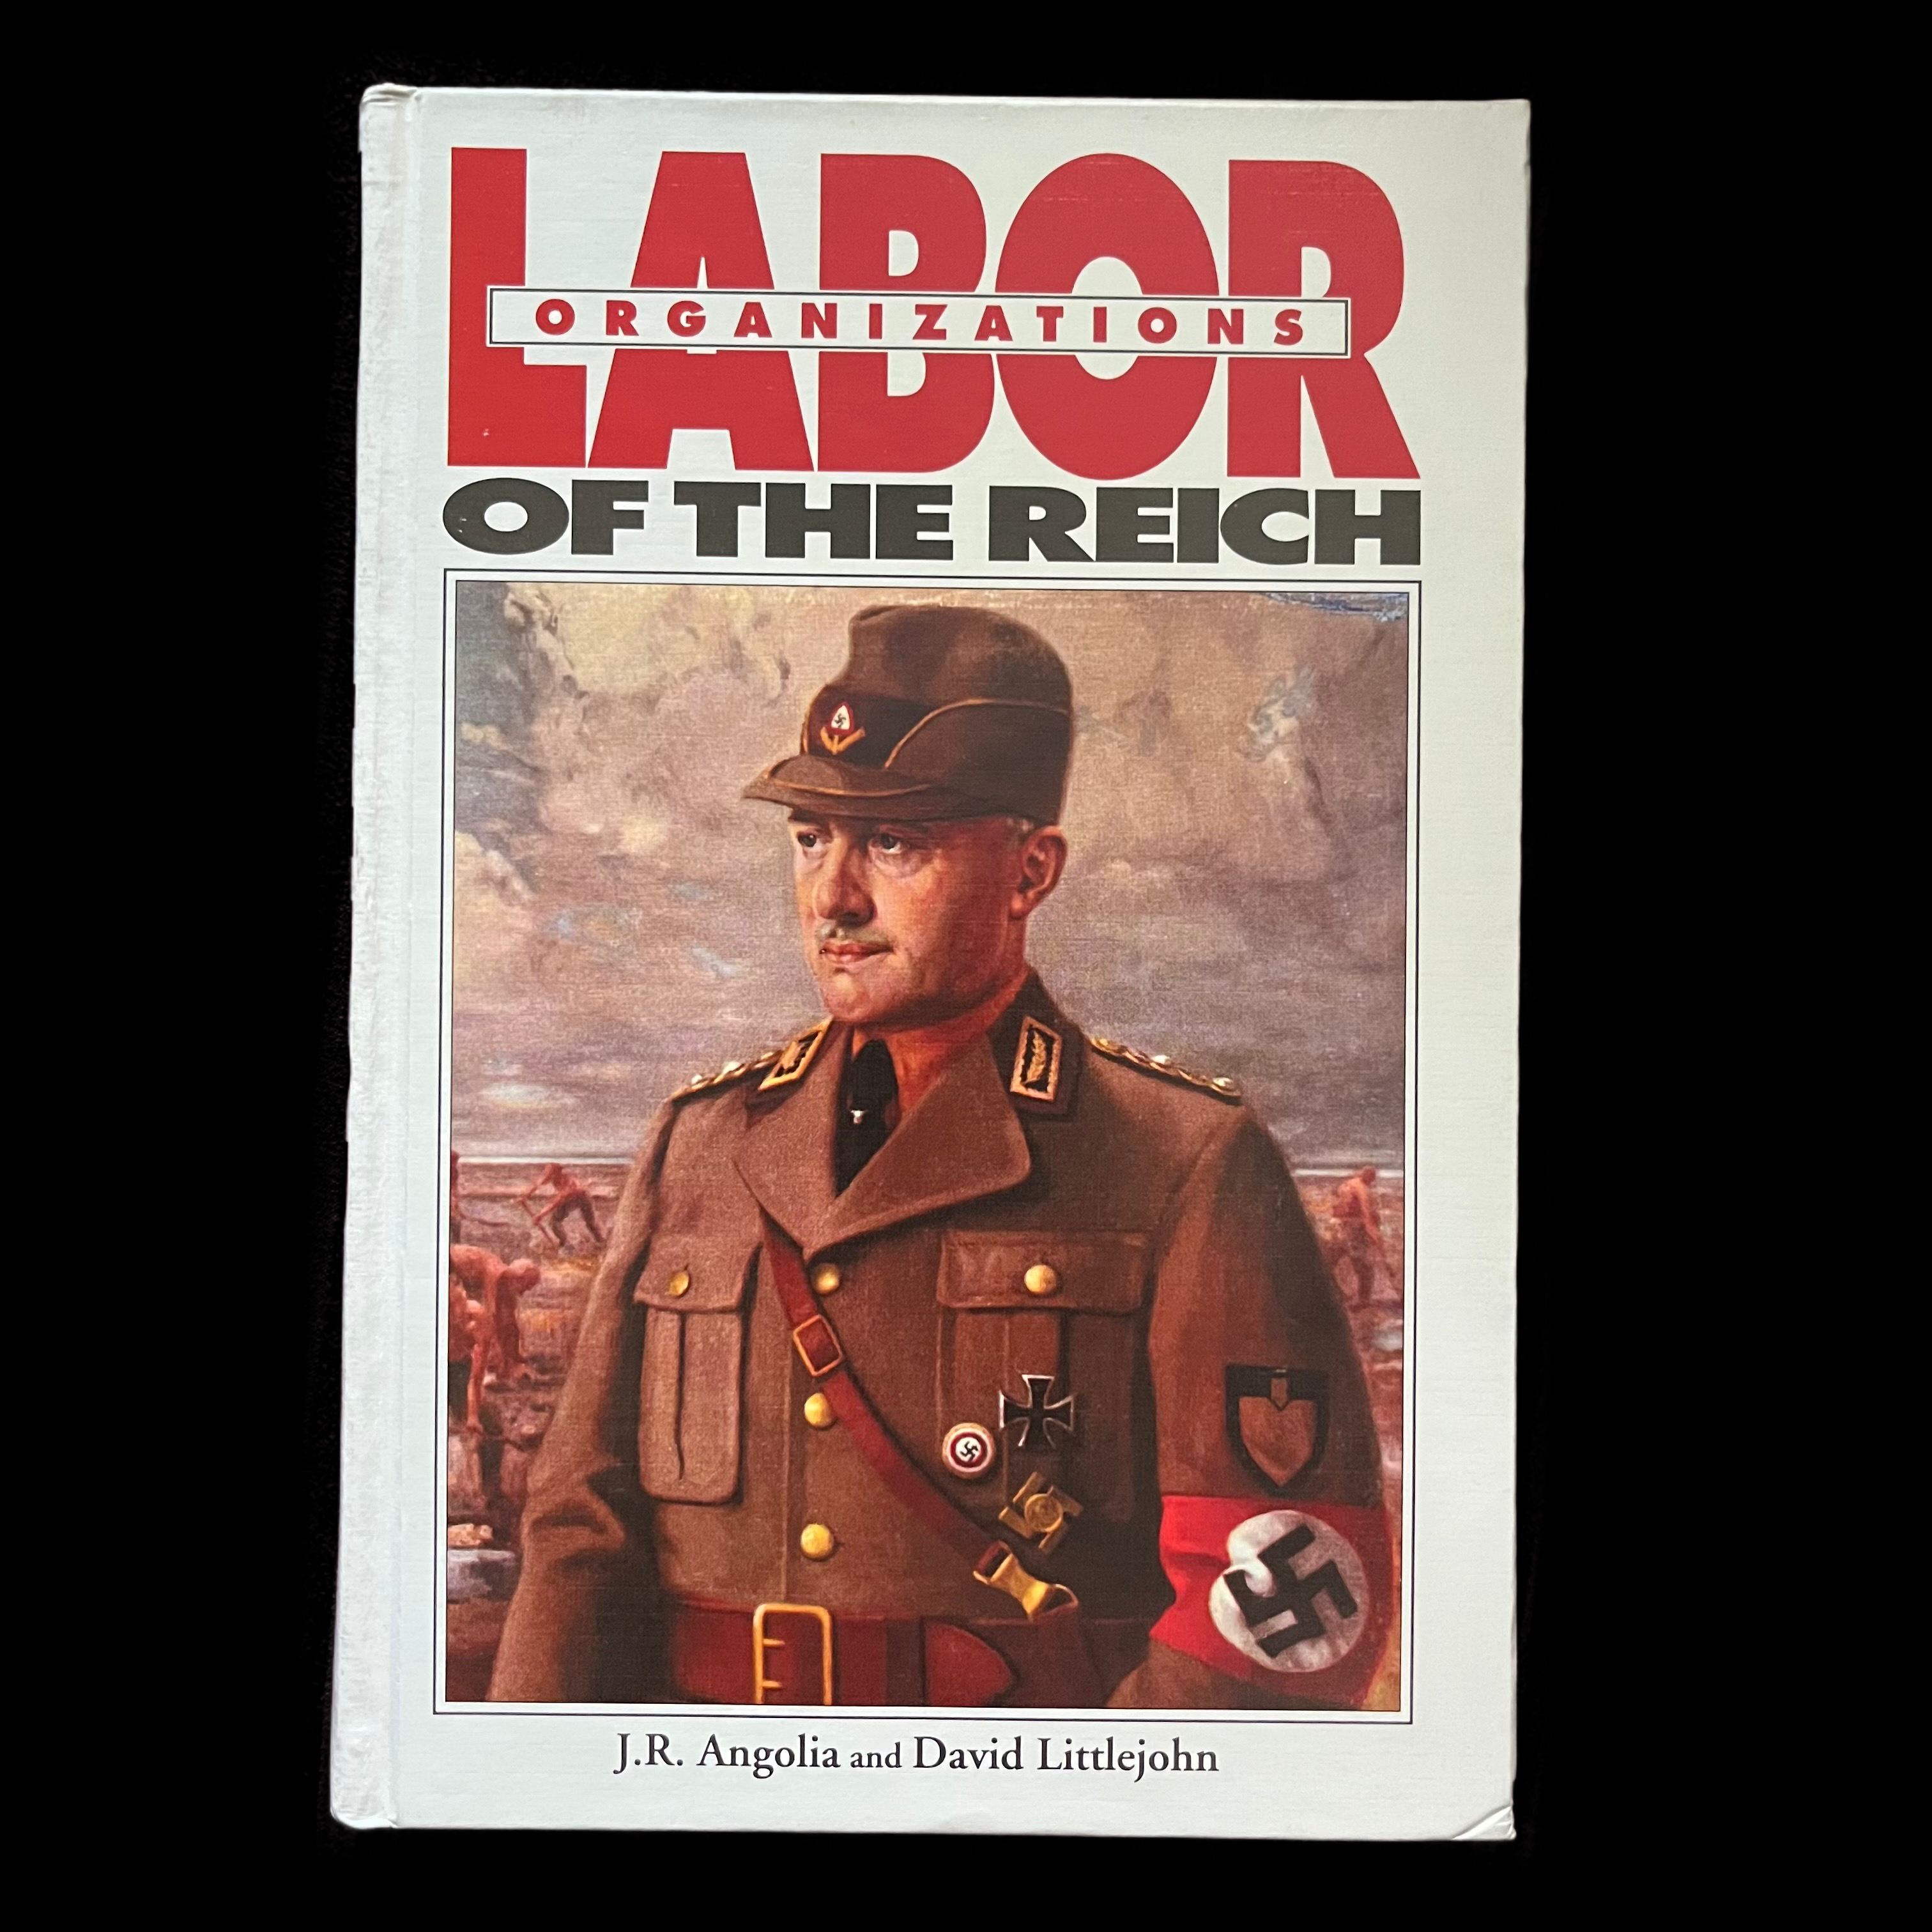 Labor Organizations of the Reich